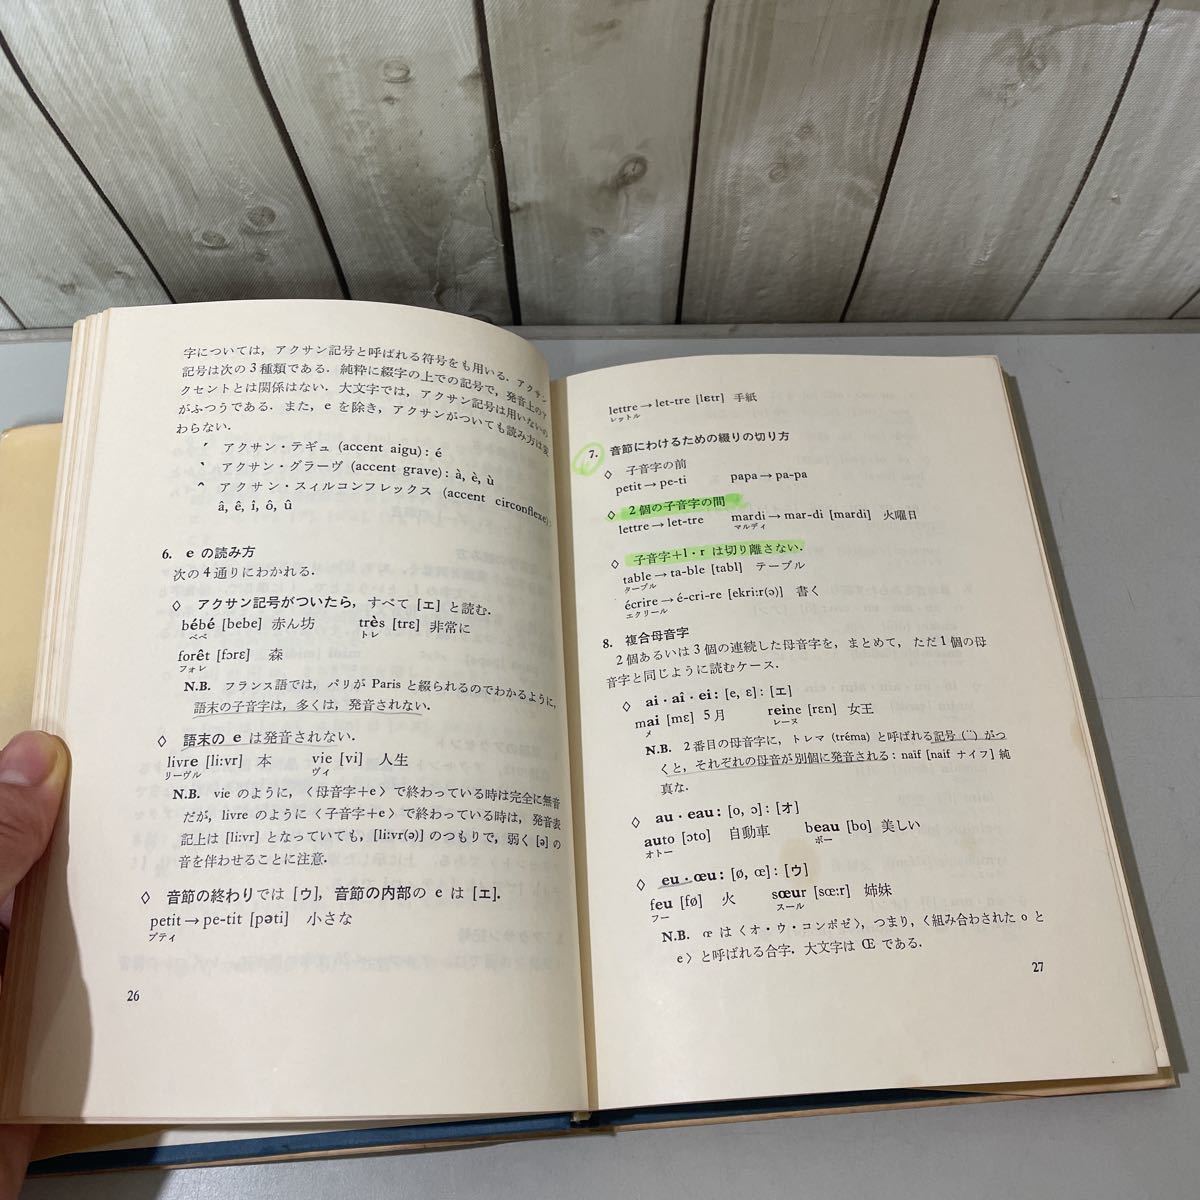 * rare * standard French introduction Sato .. Hakusuisha 1980 year /. language / language study / grammar / pronunciation / accent / reading person /../ idiom / study / reference book / language law / for law / name .*4842